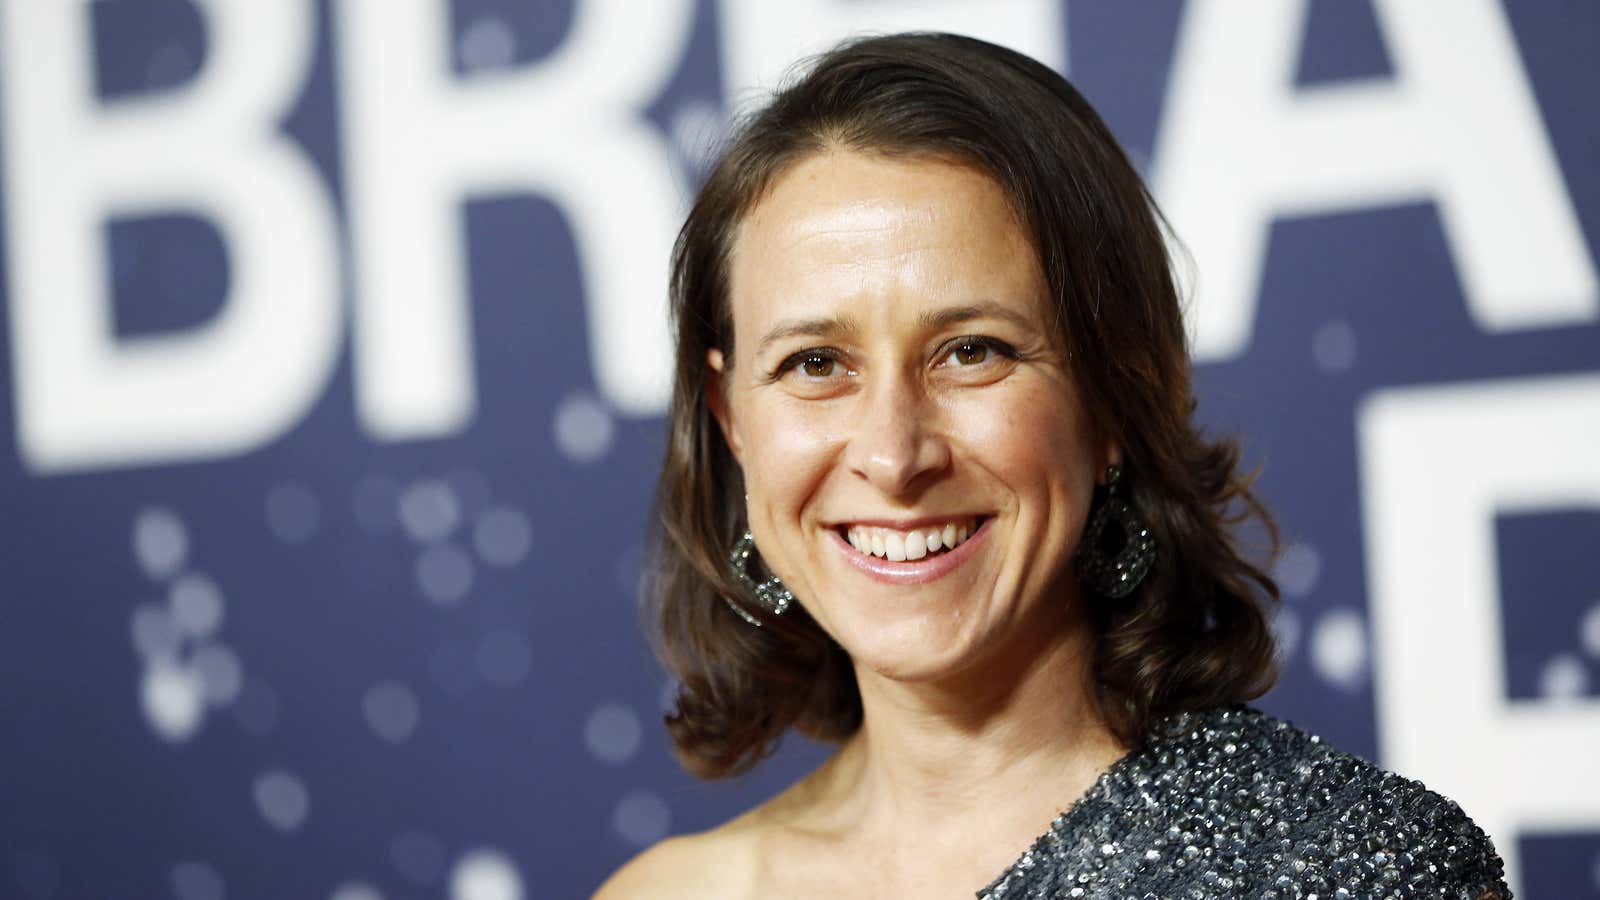 Anne Wojcicki is the co-founder and CEO of 23andMe.